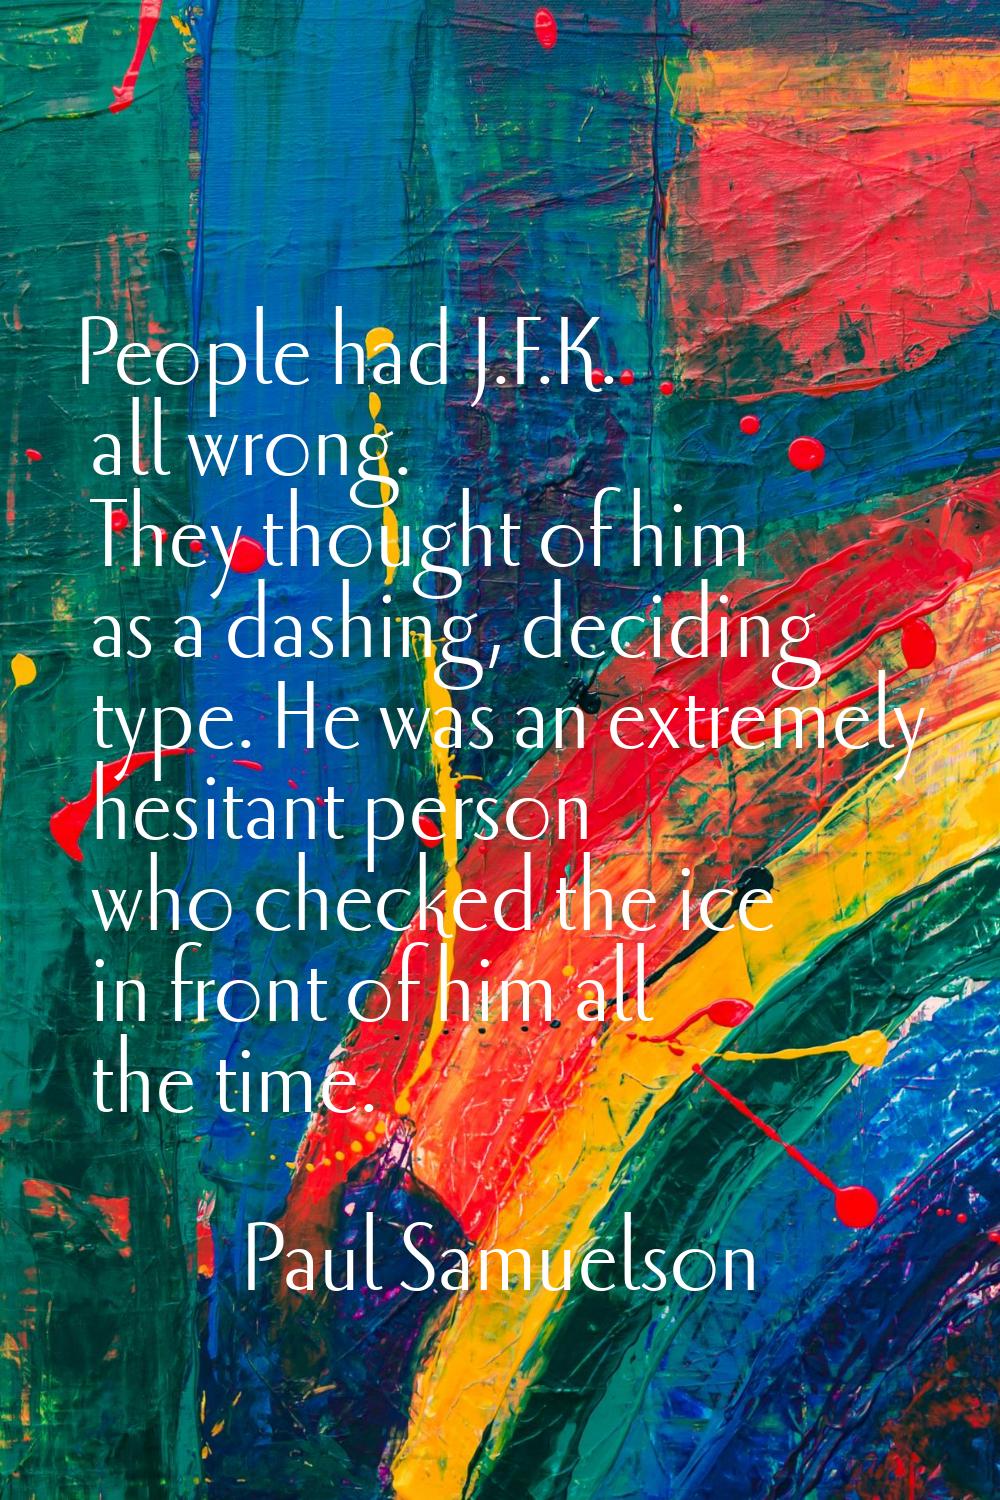 People had J.F.K. all wrong. They thought of him as a dashing, deciding type. He was an extremely h